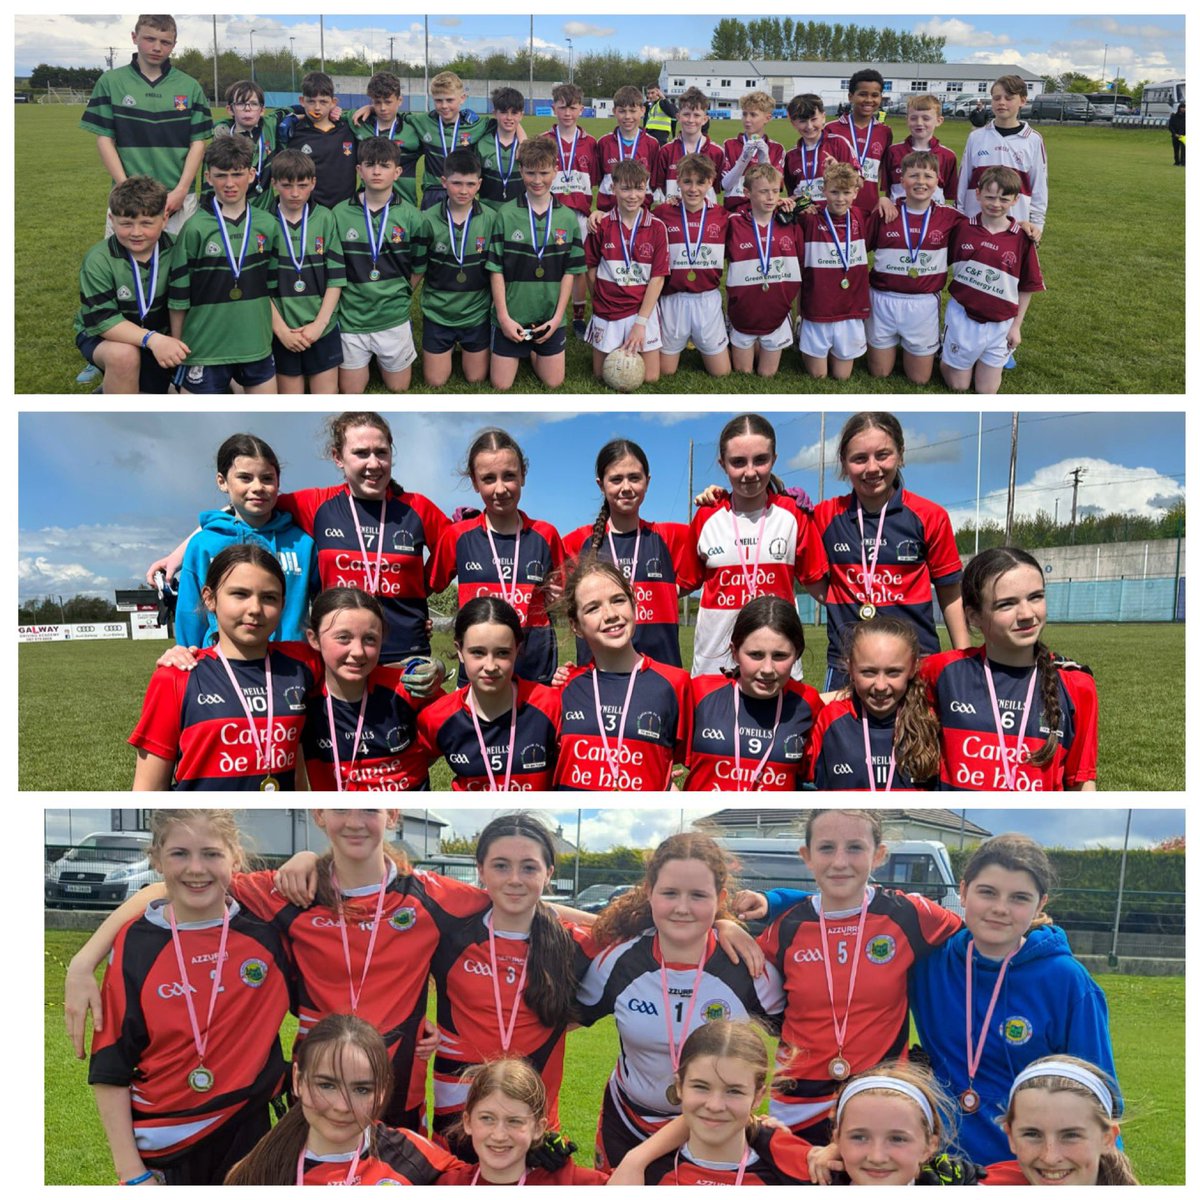 🎉 Huge shoutout to the 260+ primary school kids who competed in the TY Primary School Blitz at Oranmore GAA Pitch! 21 teams, 51 thrilling games, big wins for Athenry Boys School & Gael Scoil de Hide 🏆 Thanks to all schools & TY students for a fantastic event! #SchoolSports